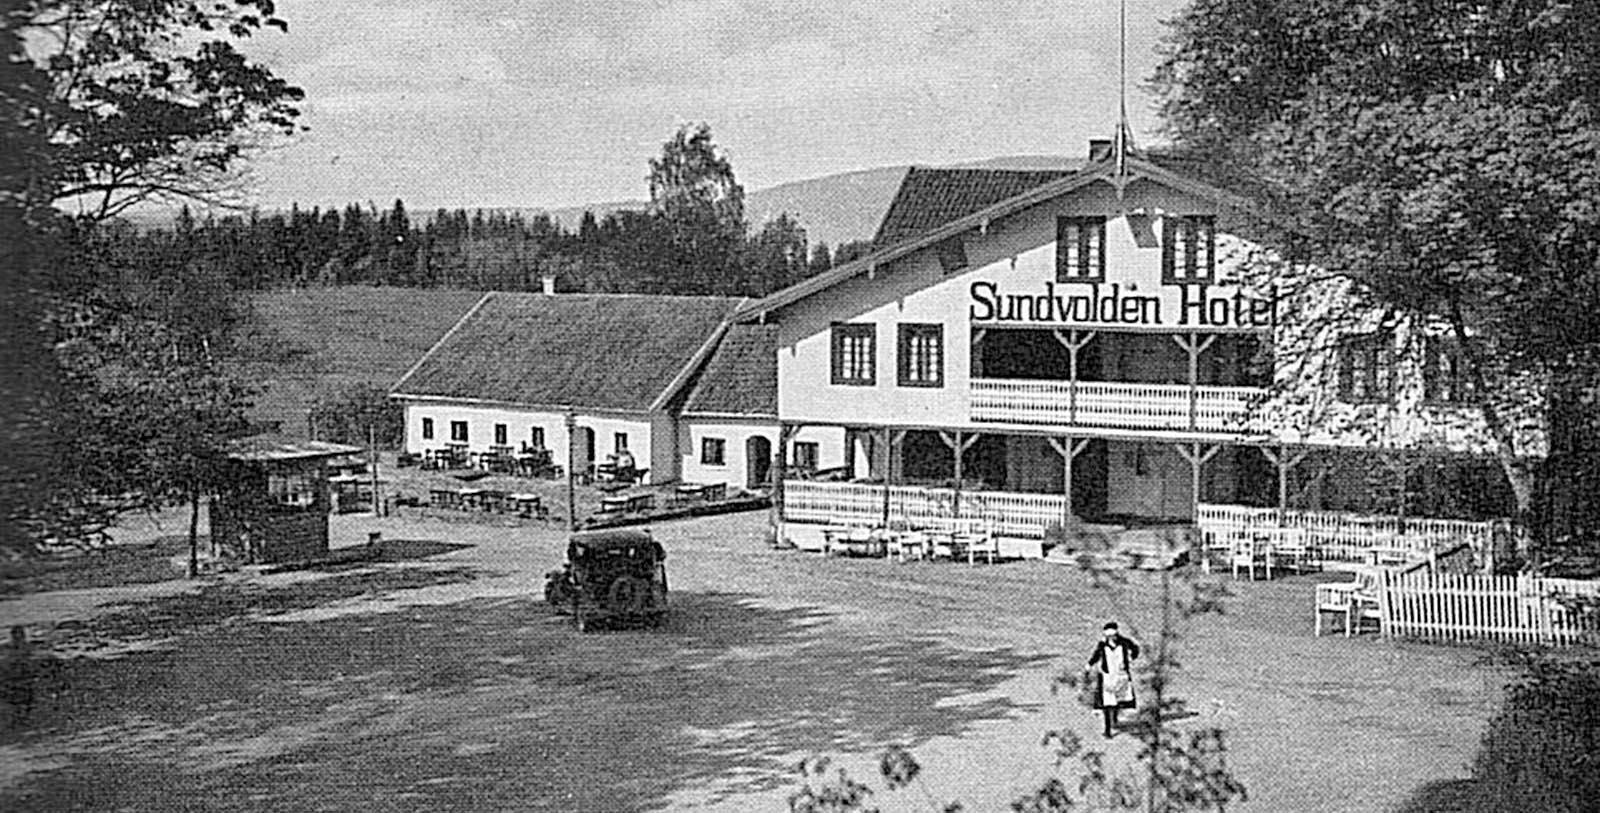 Discover the historical character of the Sundvolden Hotel.